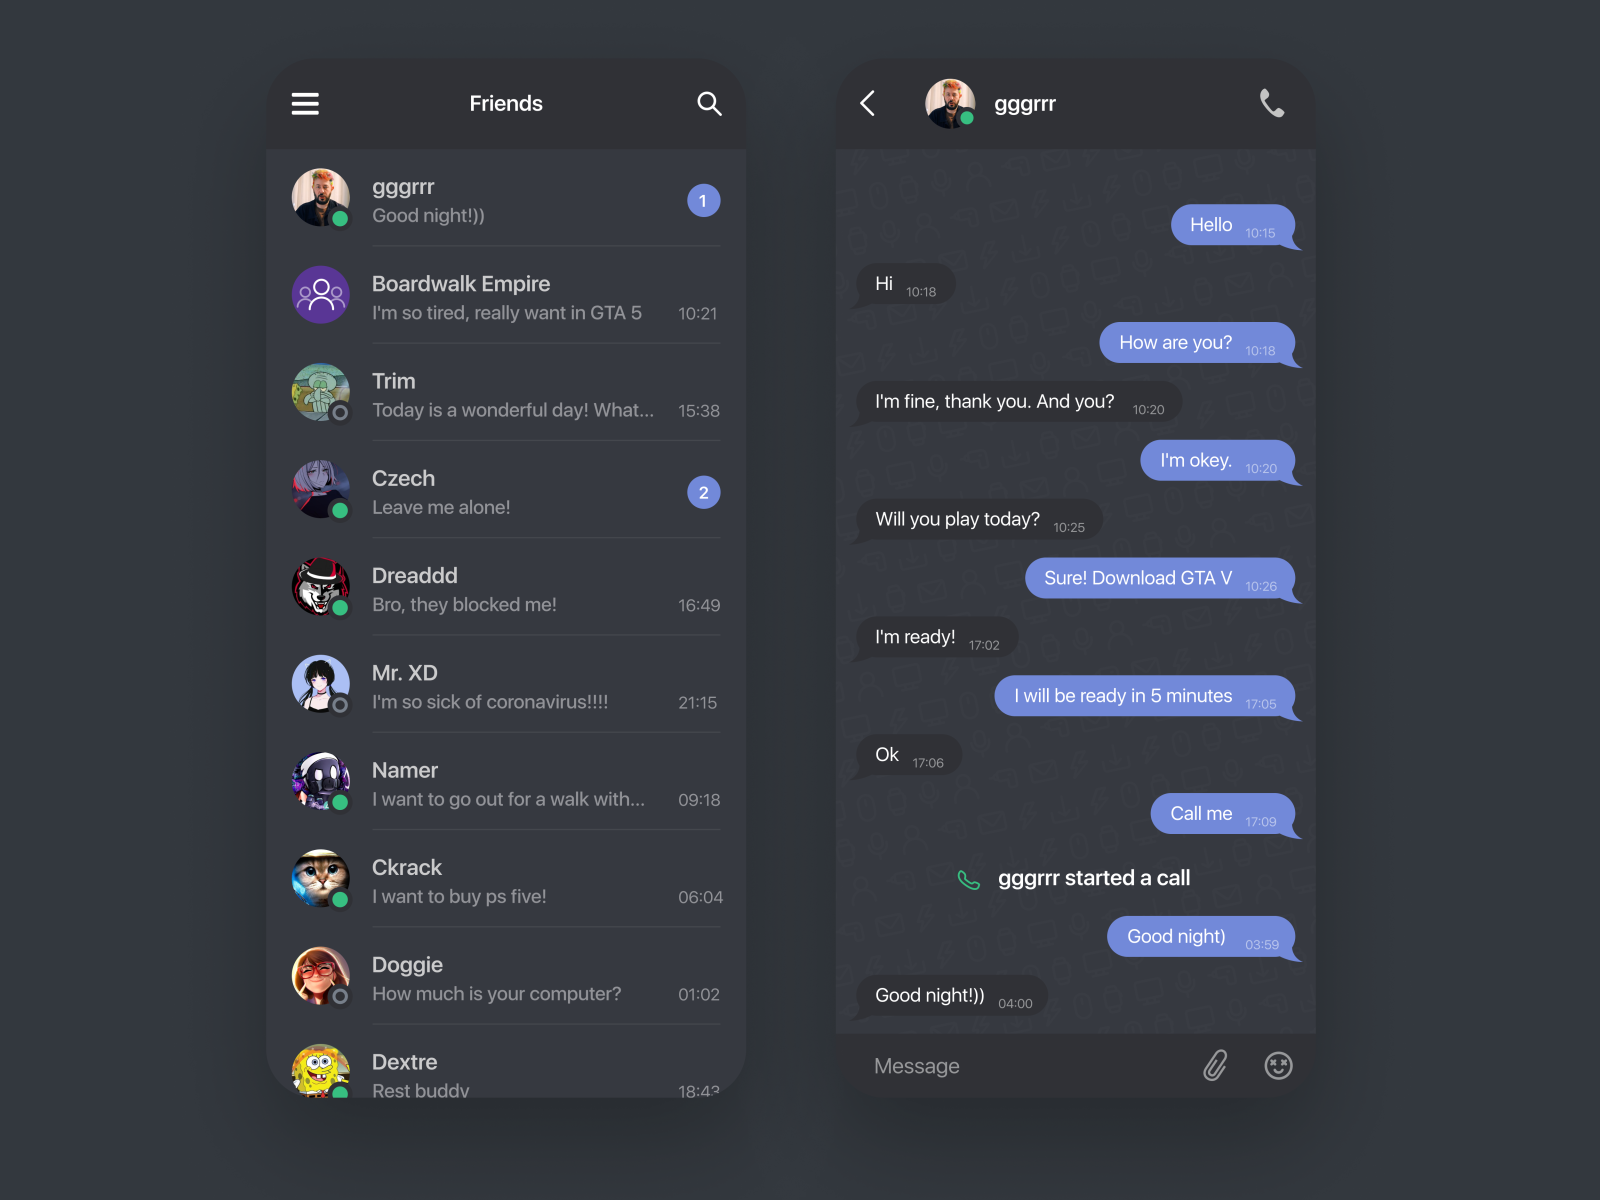 redesign-discord-chat-by-oleg-shalashowich-on-dribbble